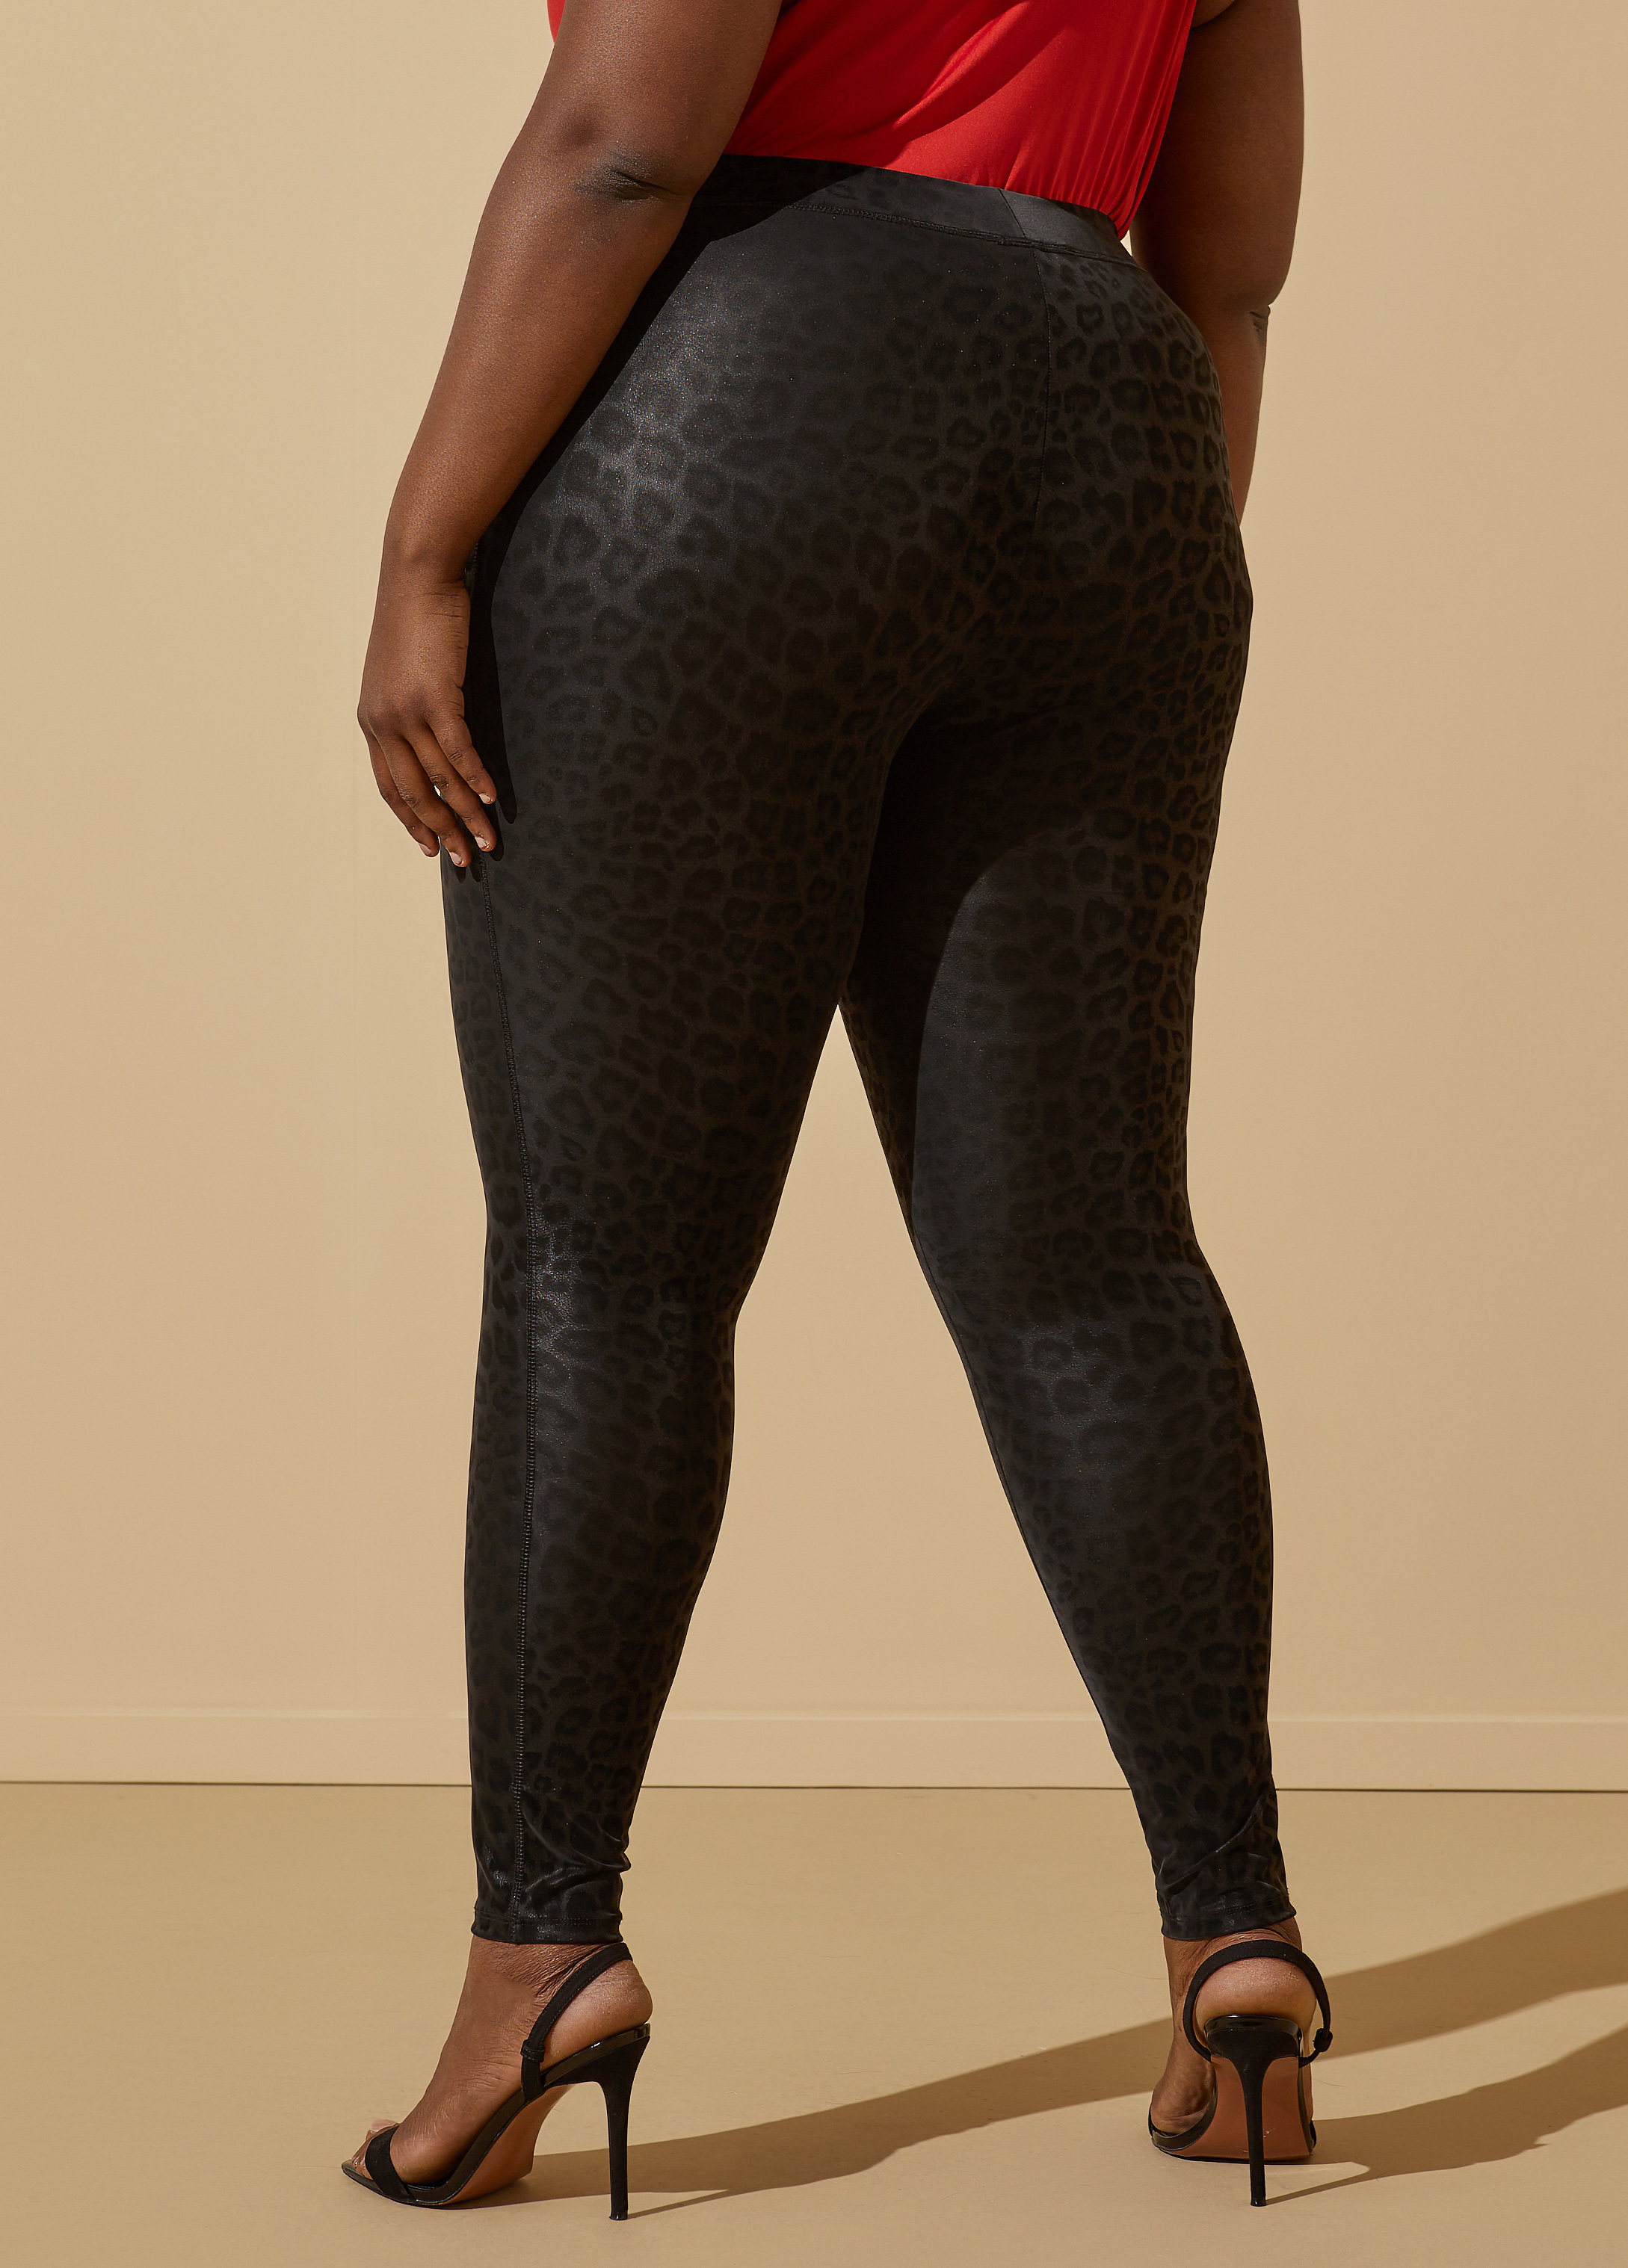 Black Extra Long Leggings with a Pattern